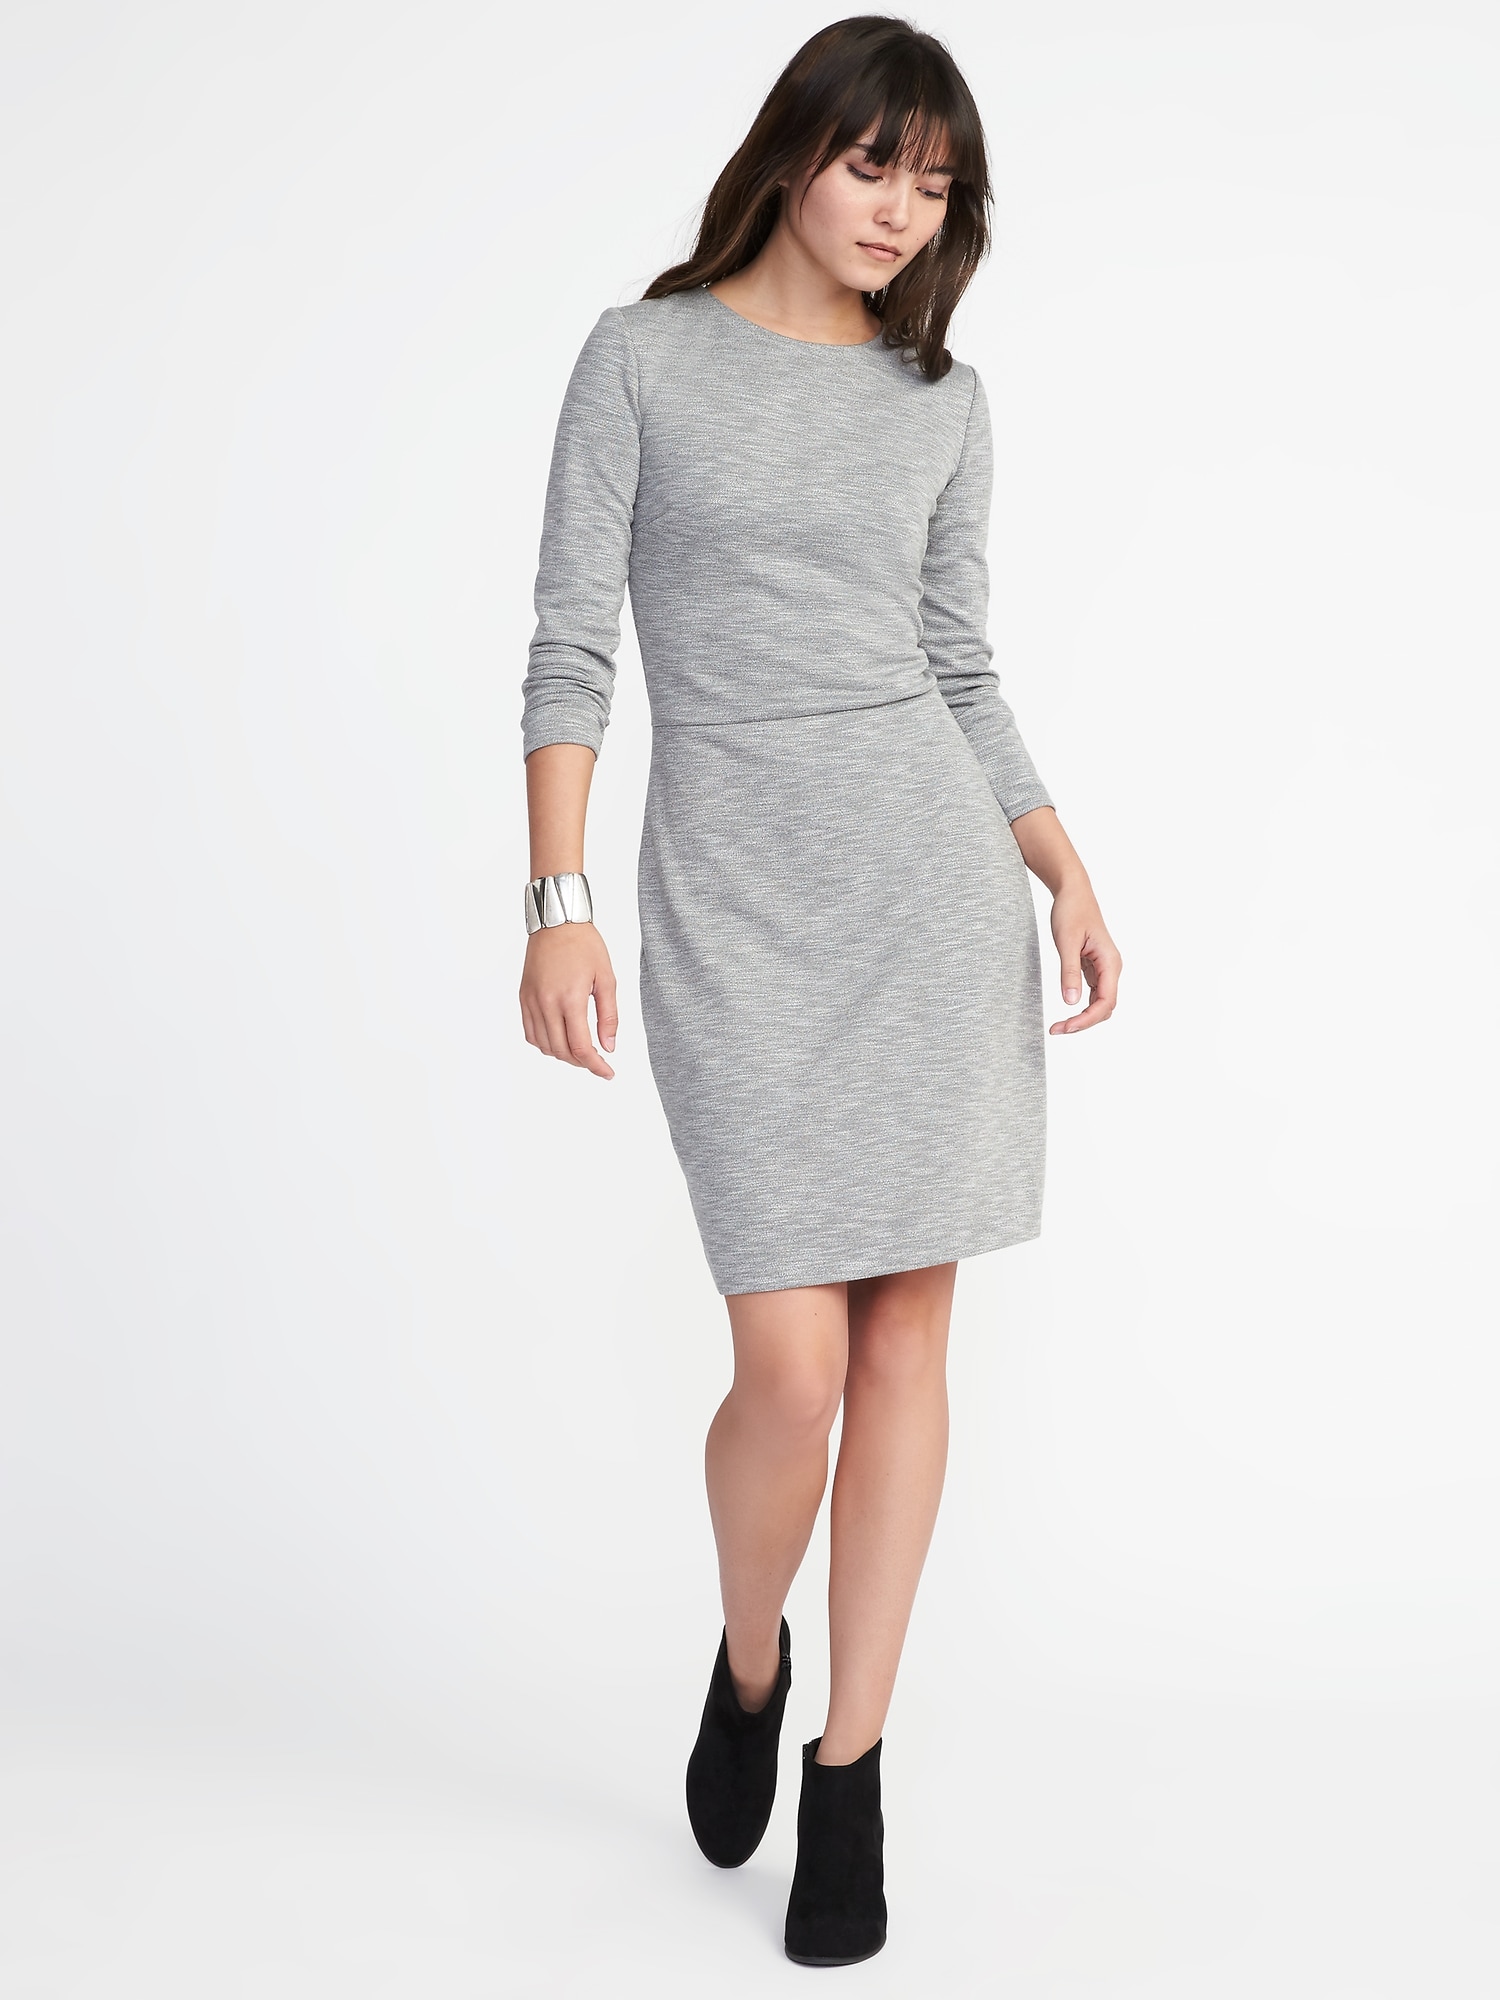 Textured Double-Knit Sheath Dress for Women | Old Navy